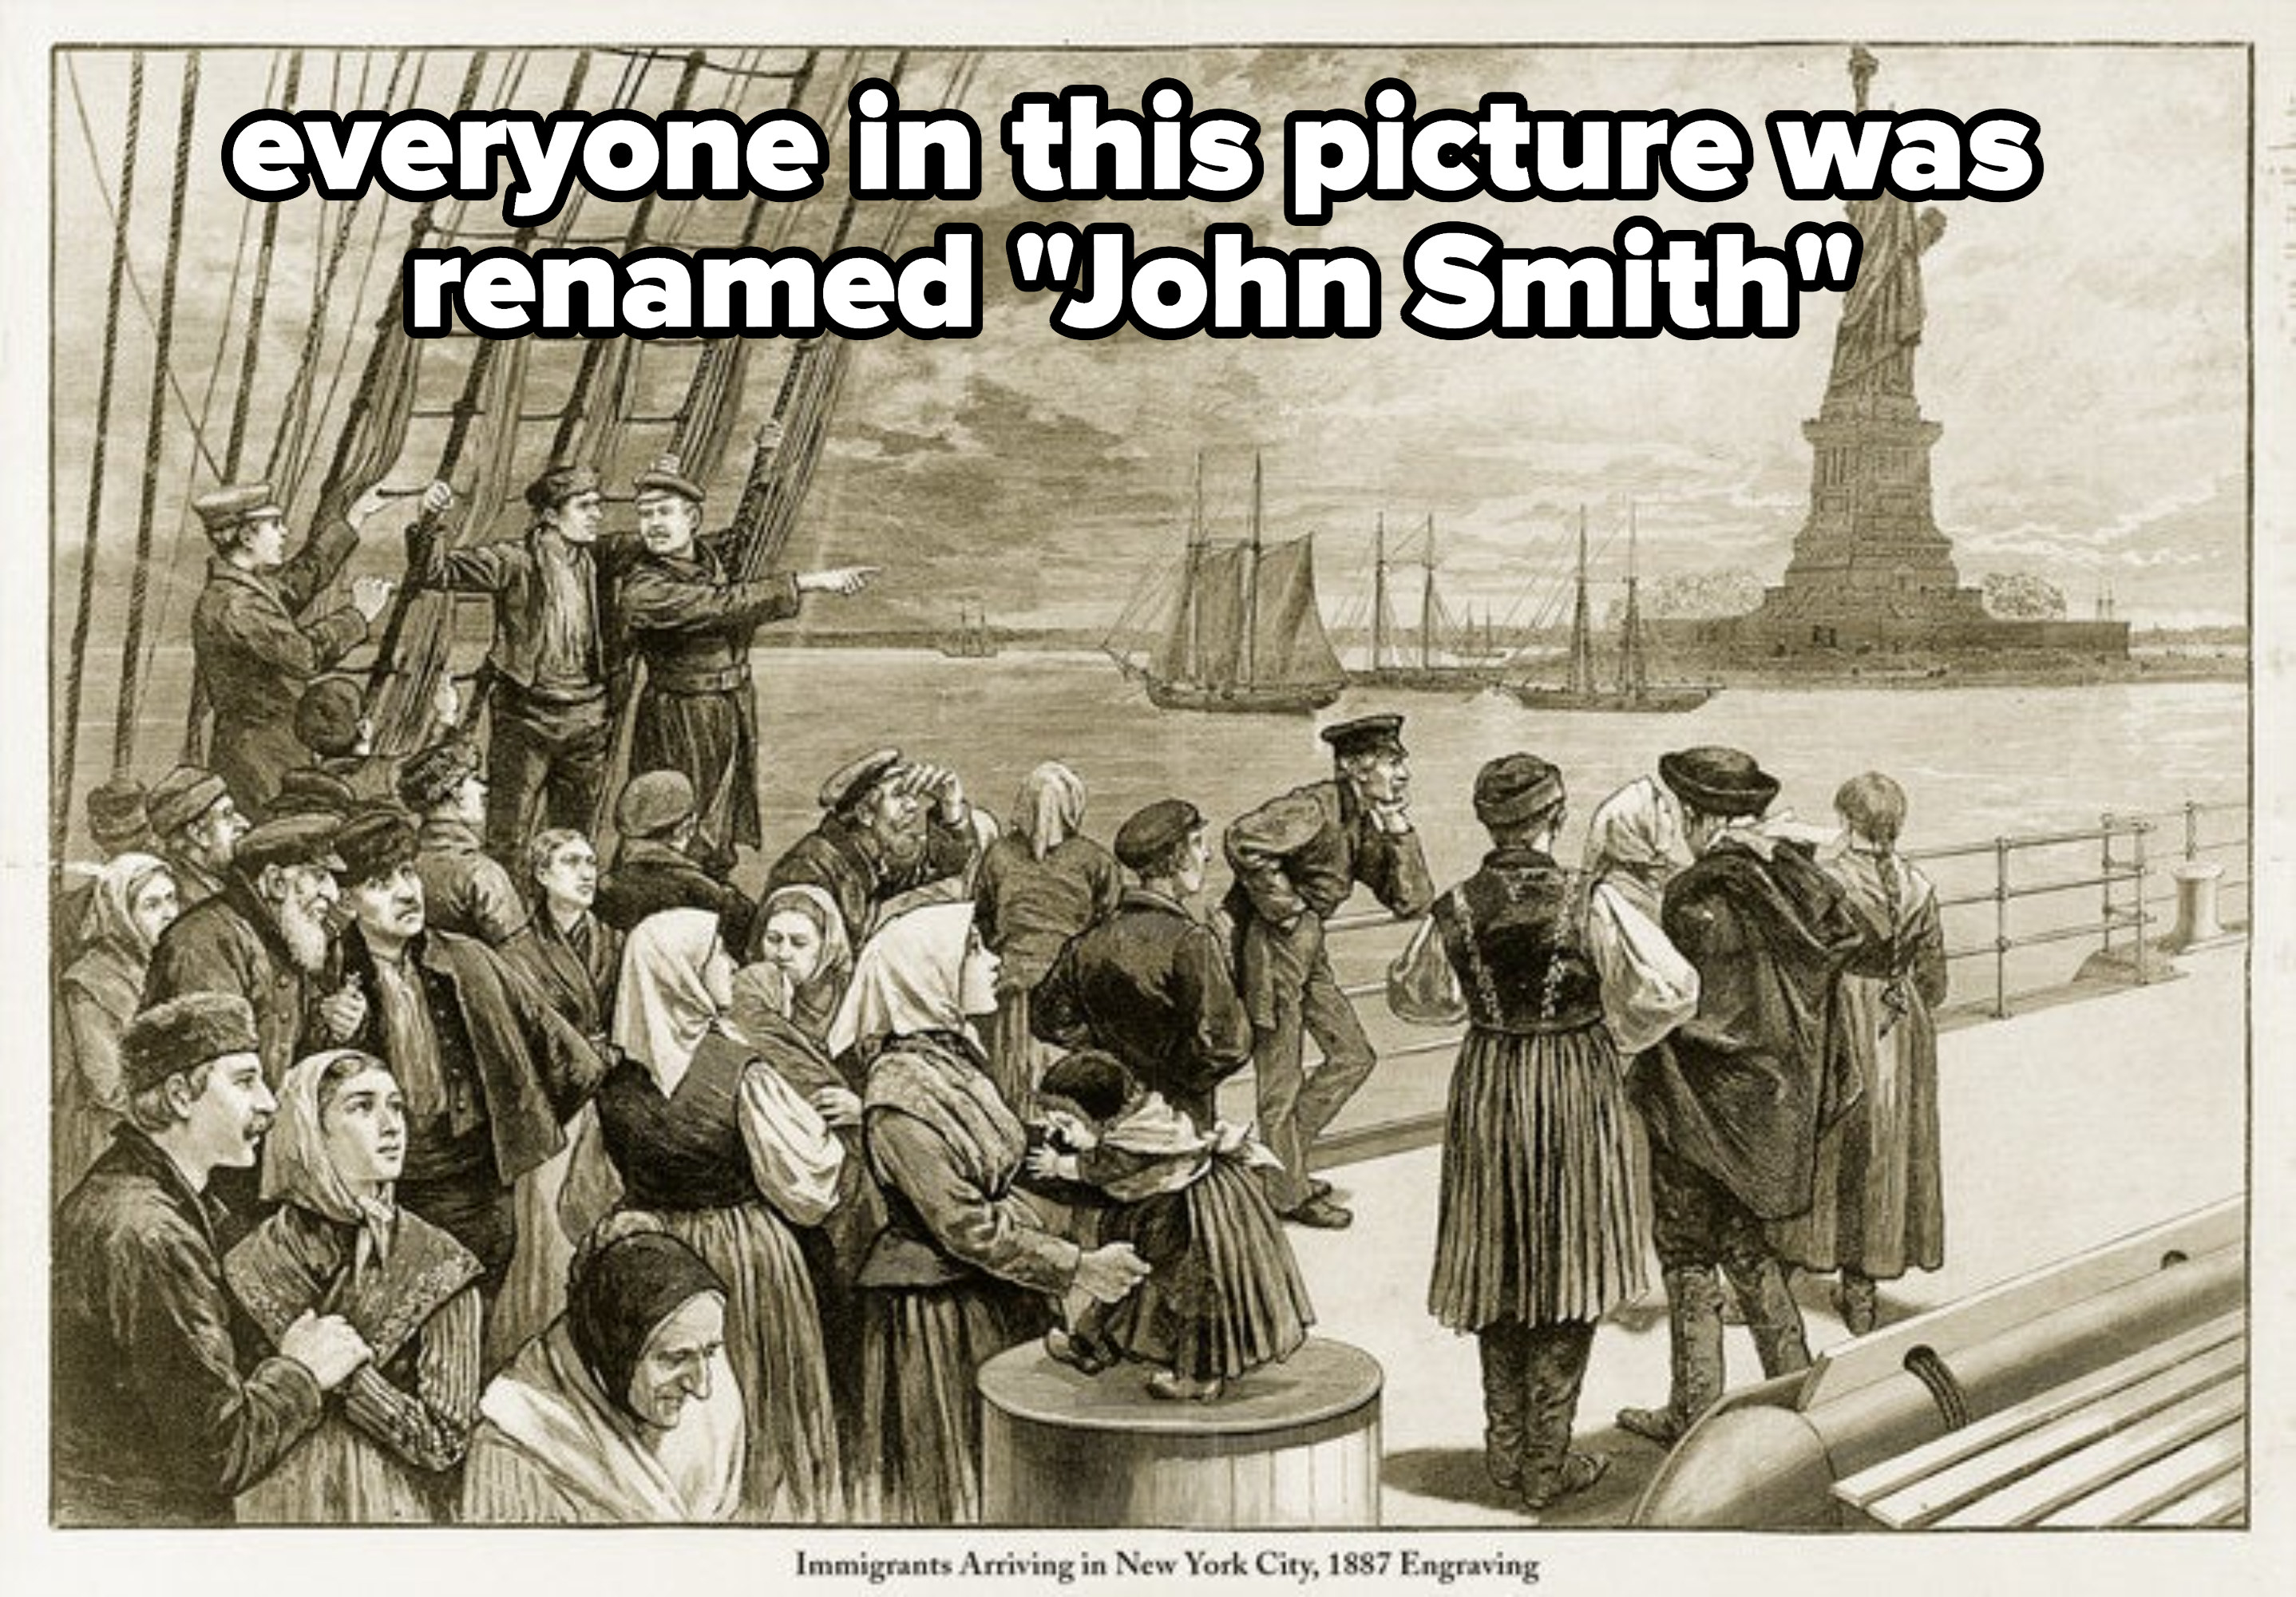 an engraving of immigrants arriving to new york city, with caption: everyone in this picture was renamed John Smith